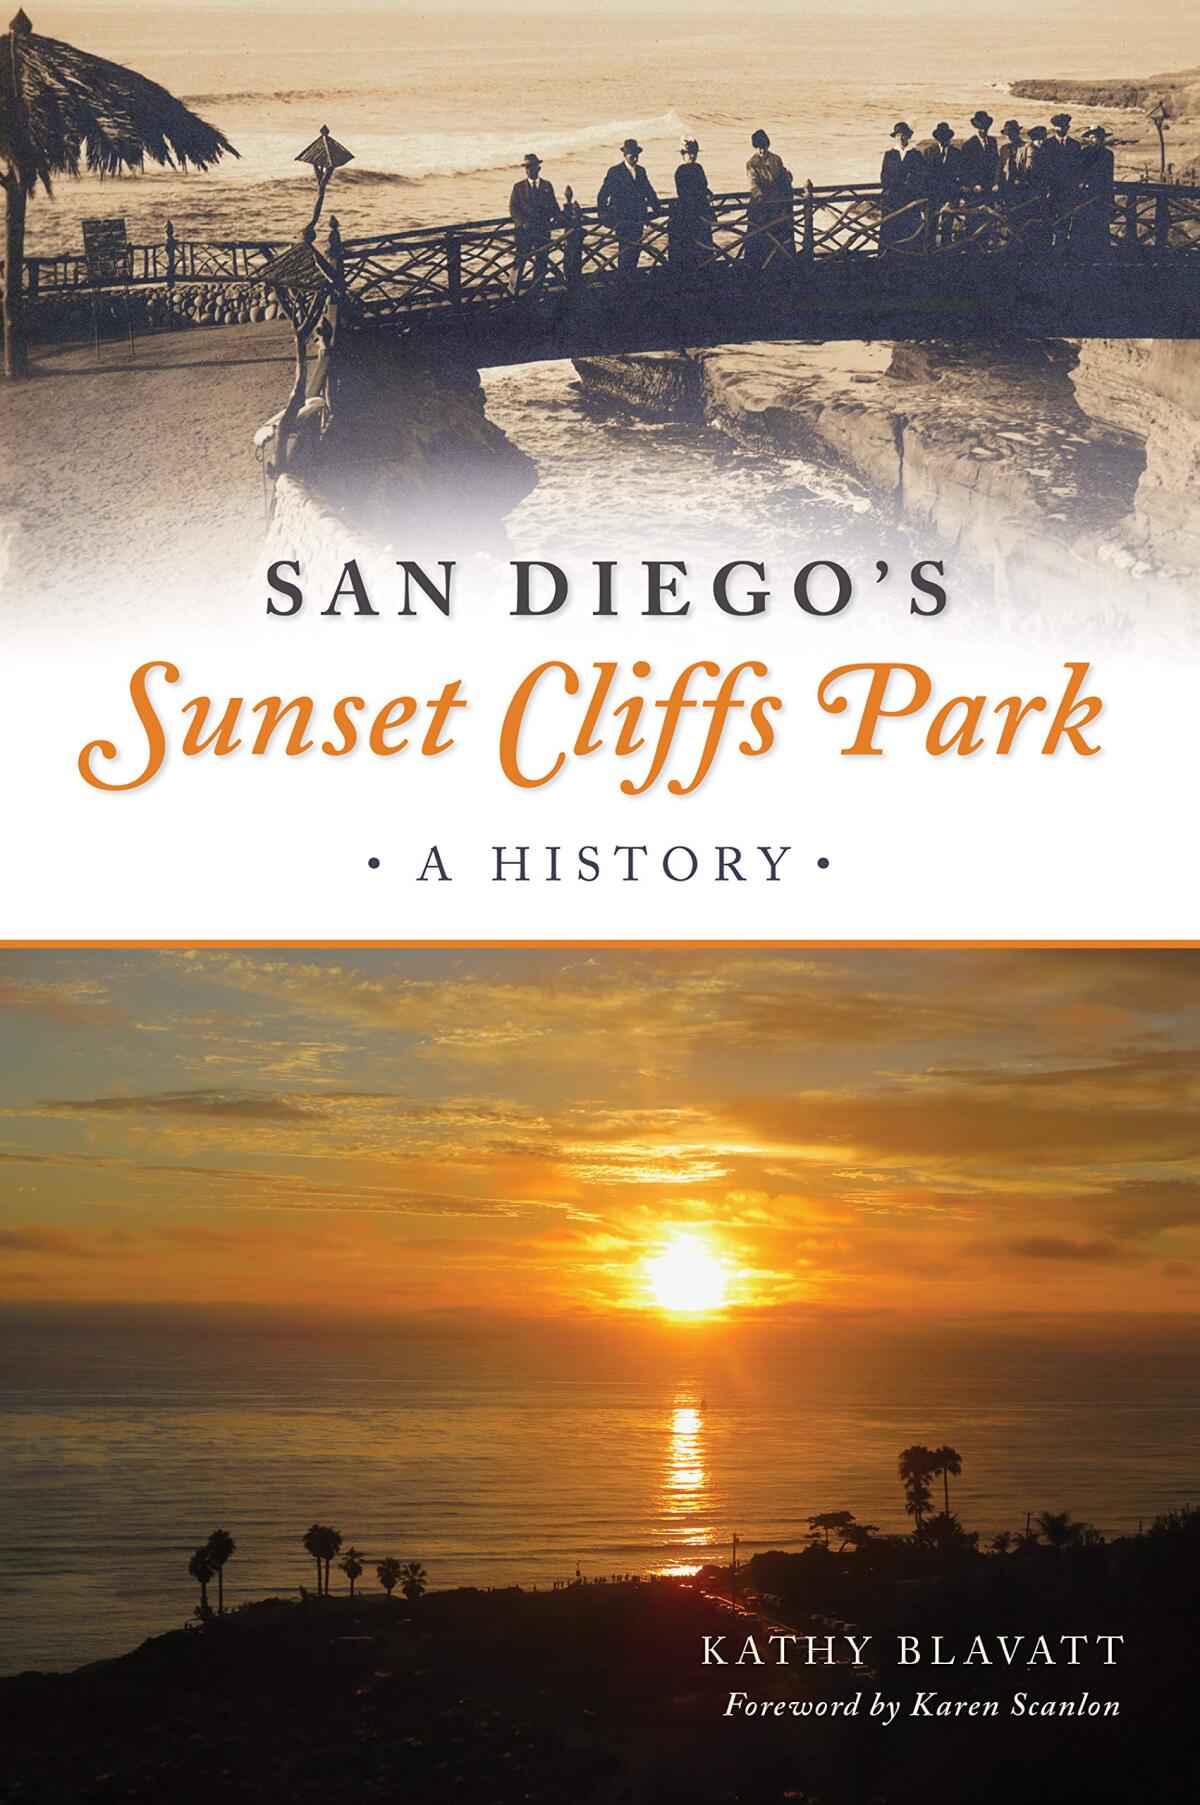 The story of Al Spalding and Sunset Cliffs Park is told in Ocean Beach author Kathy Blavatt's new book.